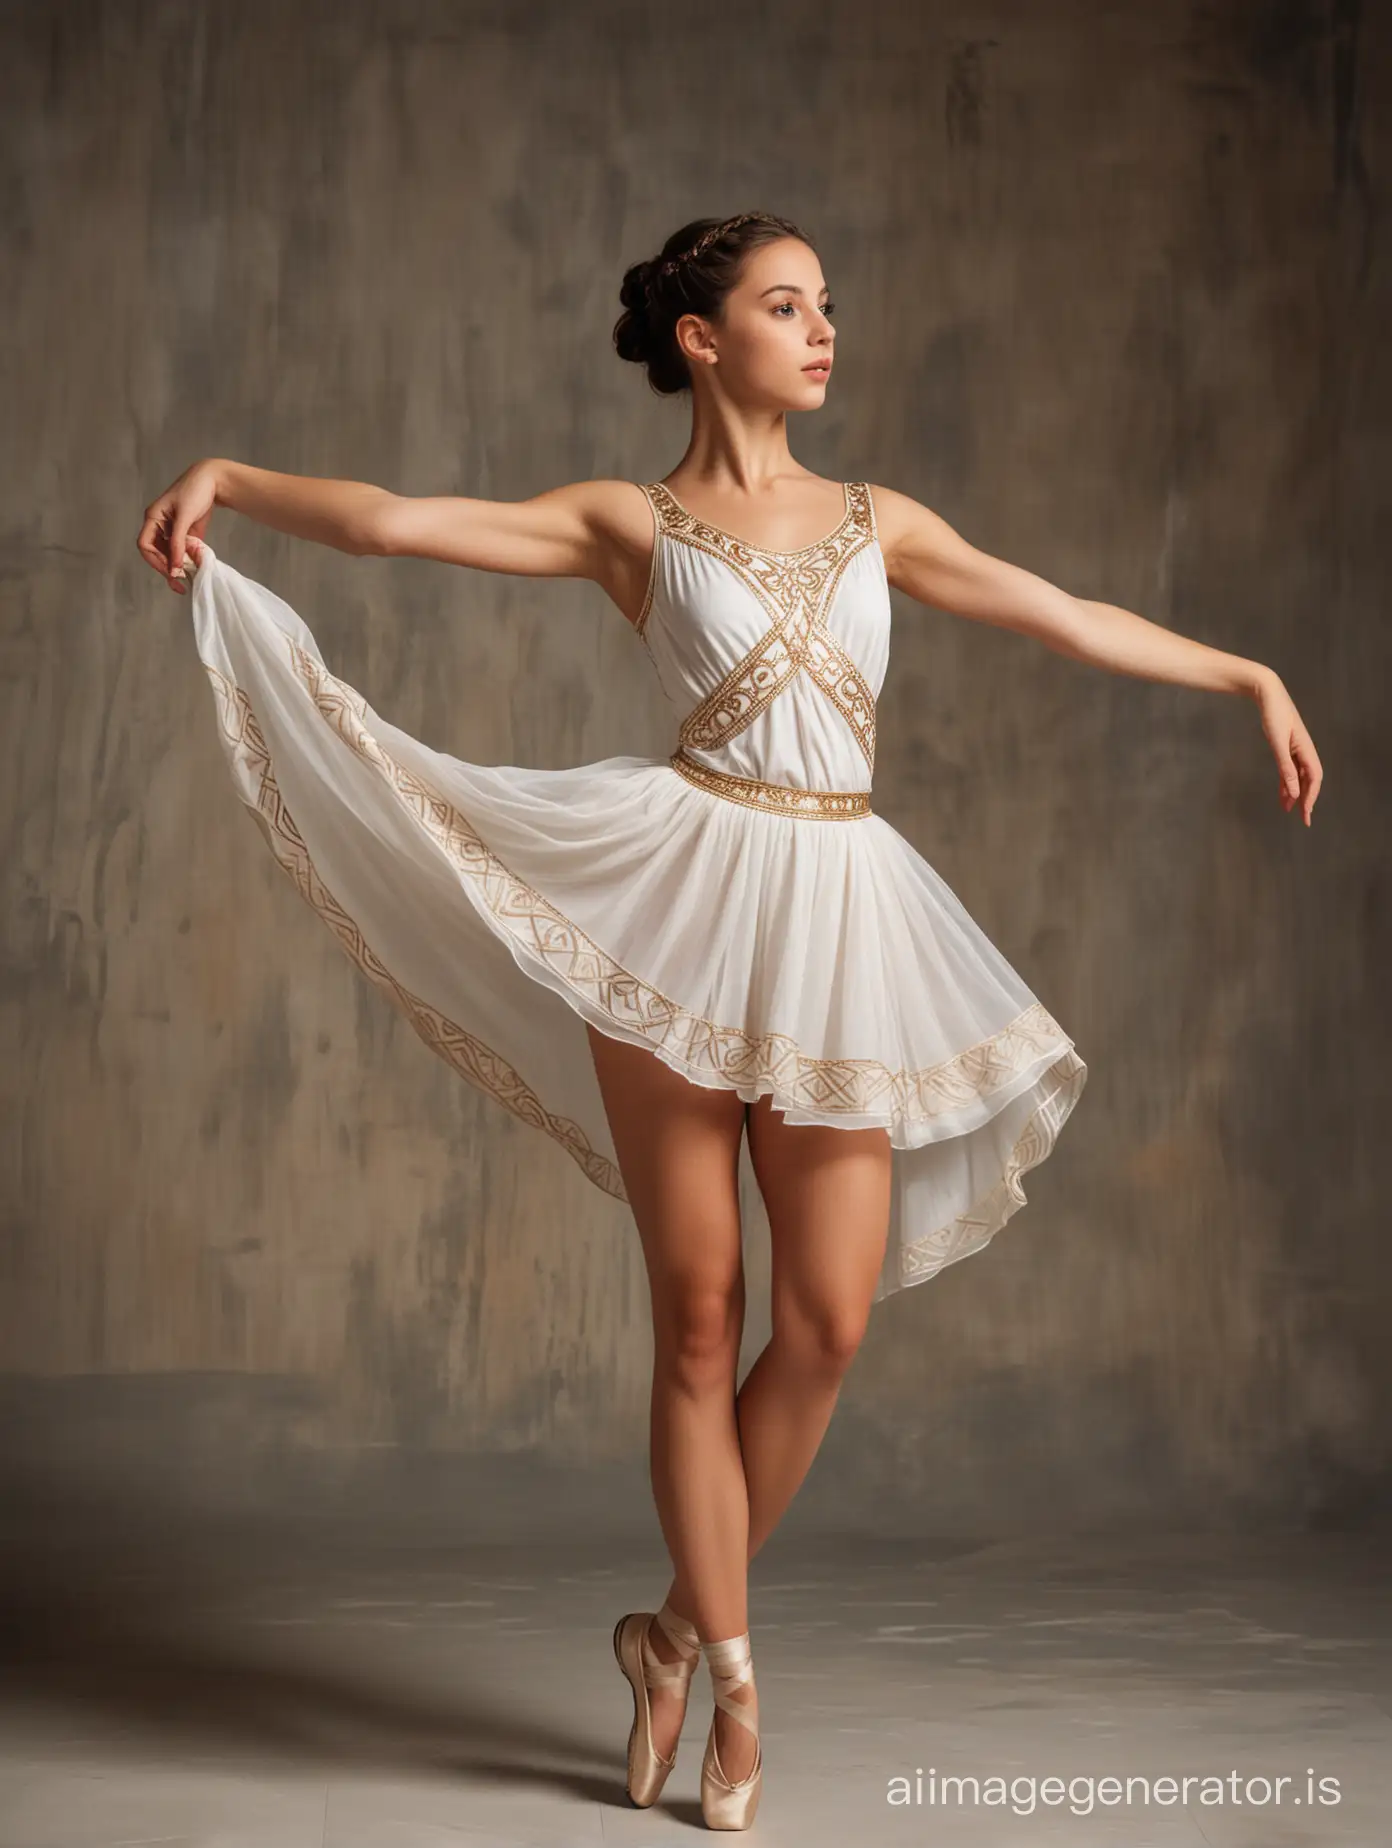 incredibly beautiful young ballerina in ancient greek tunica